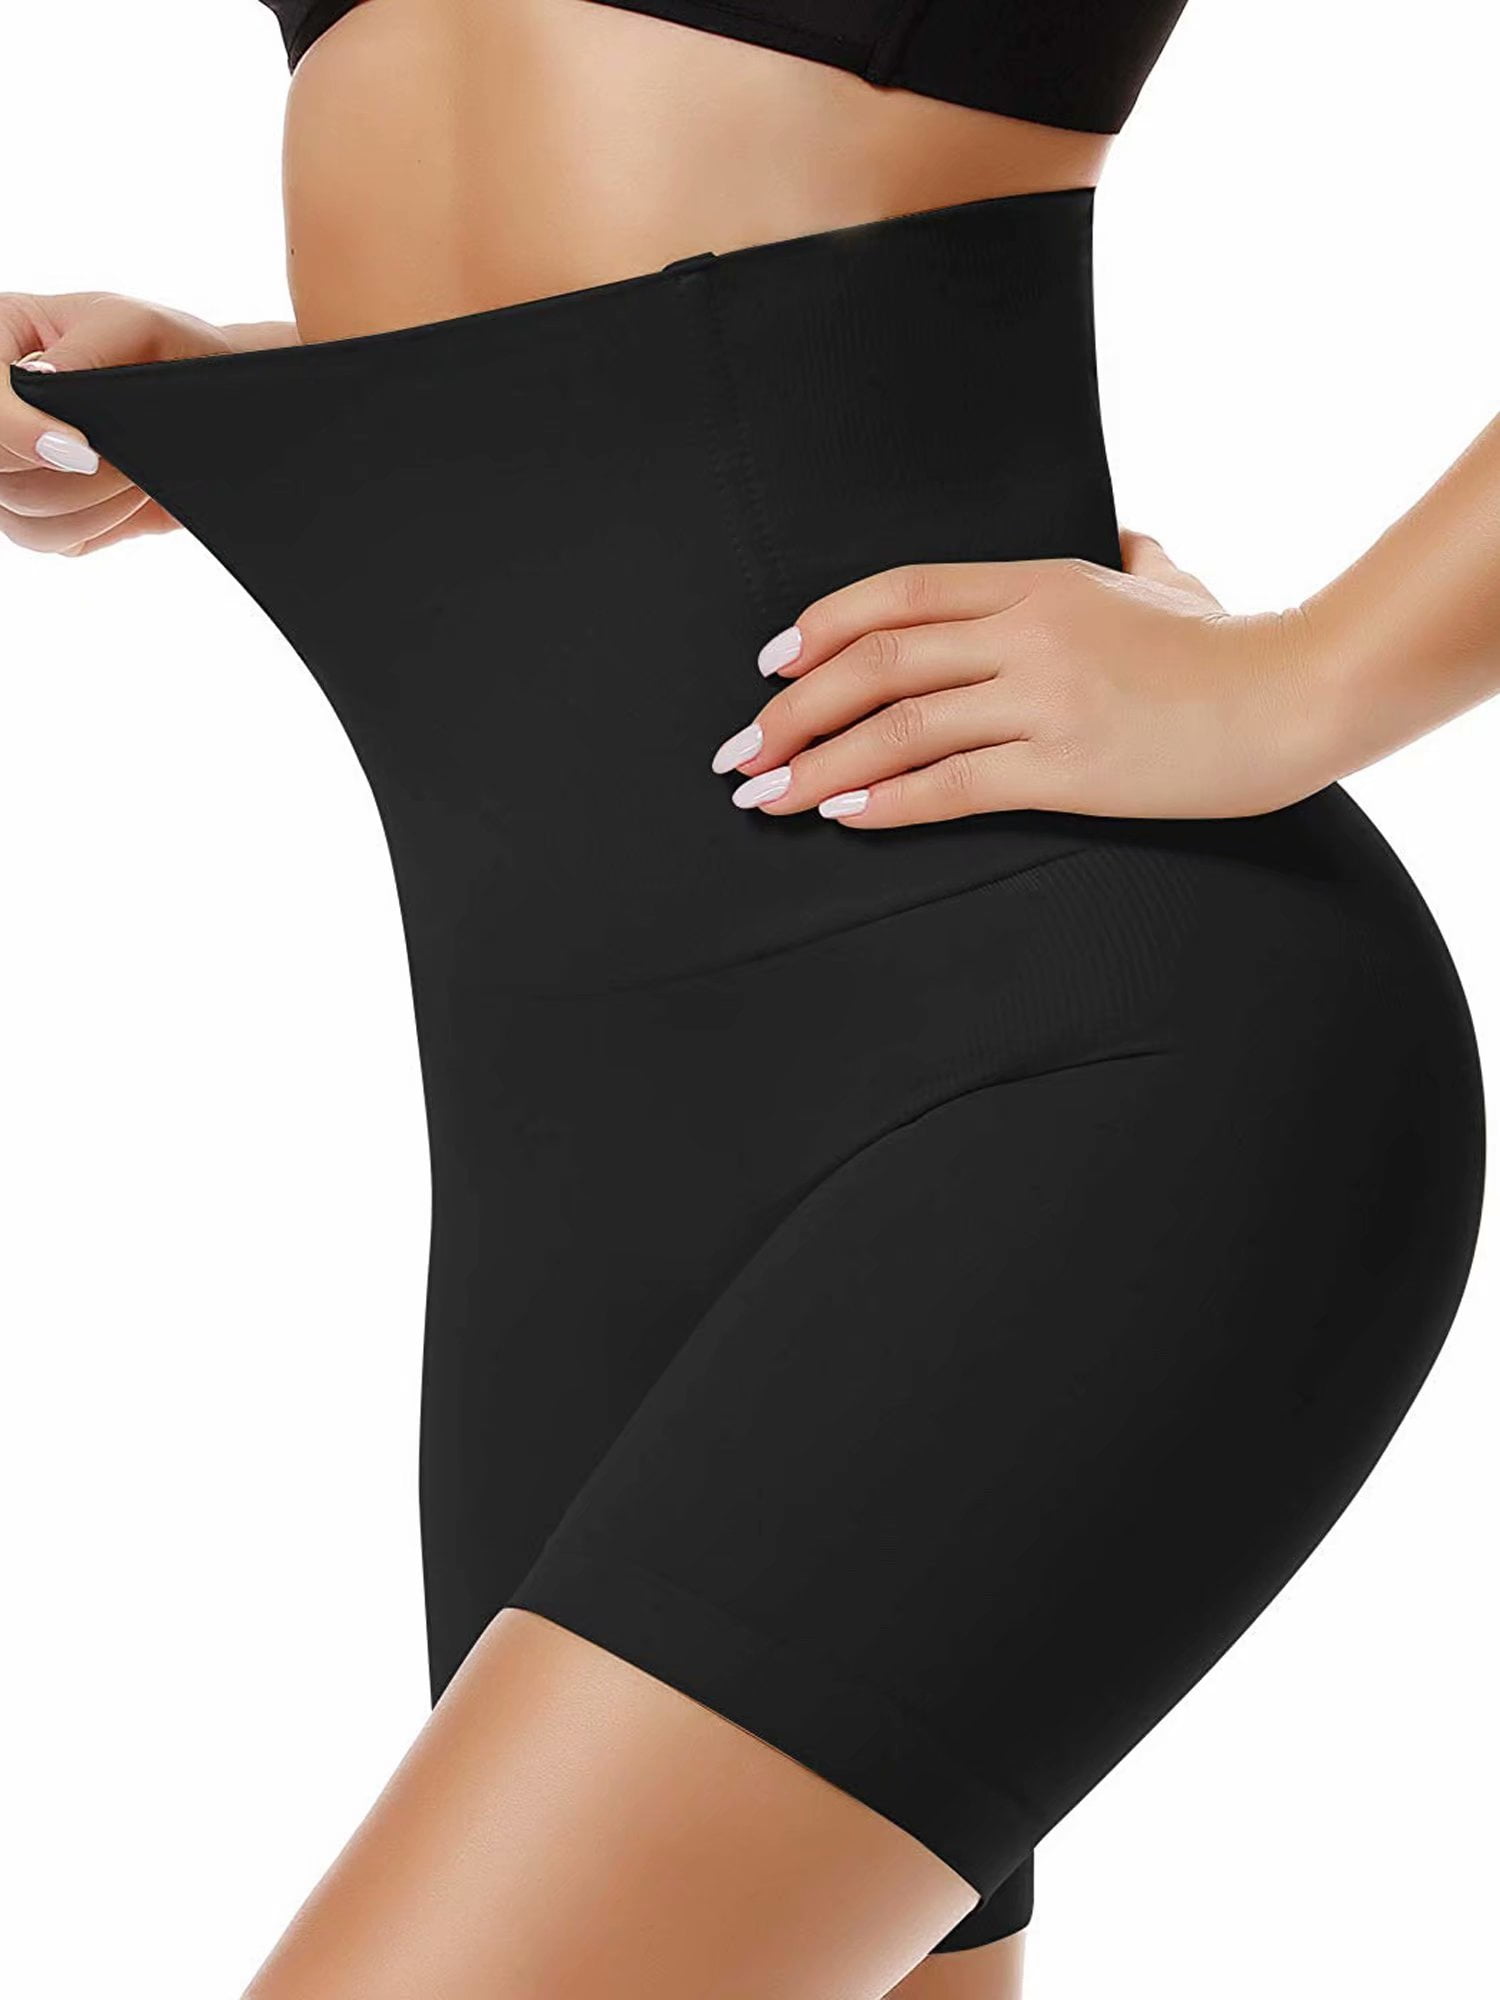 Women High Waist Panties Female Shaping Briefs Control Body Slimming Belly In 